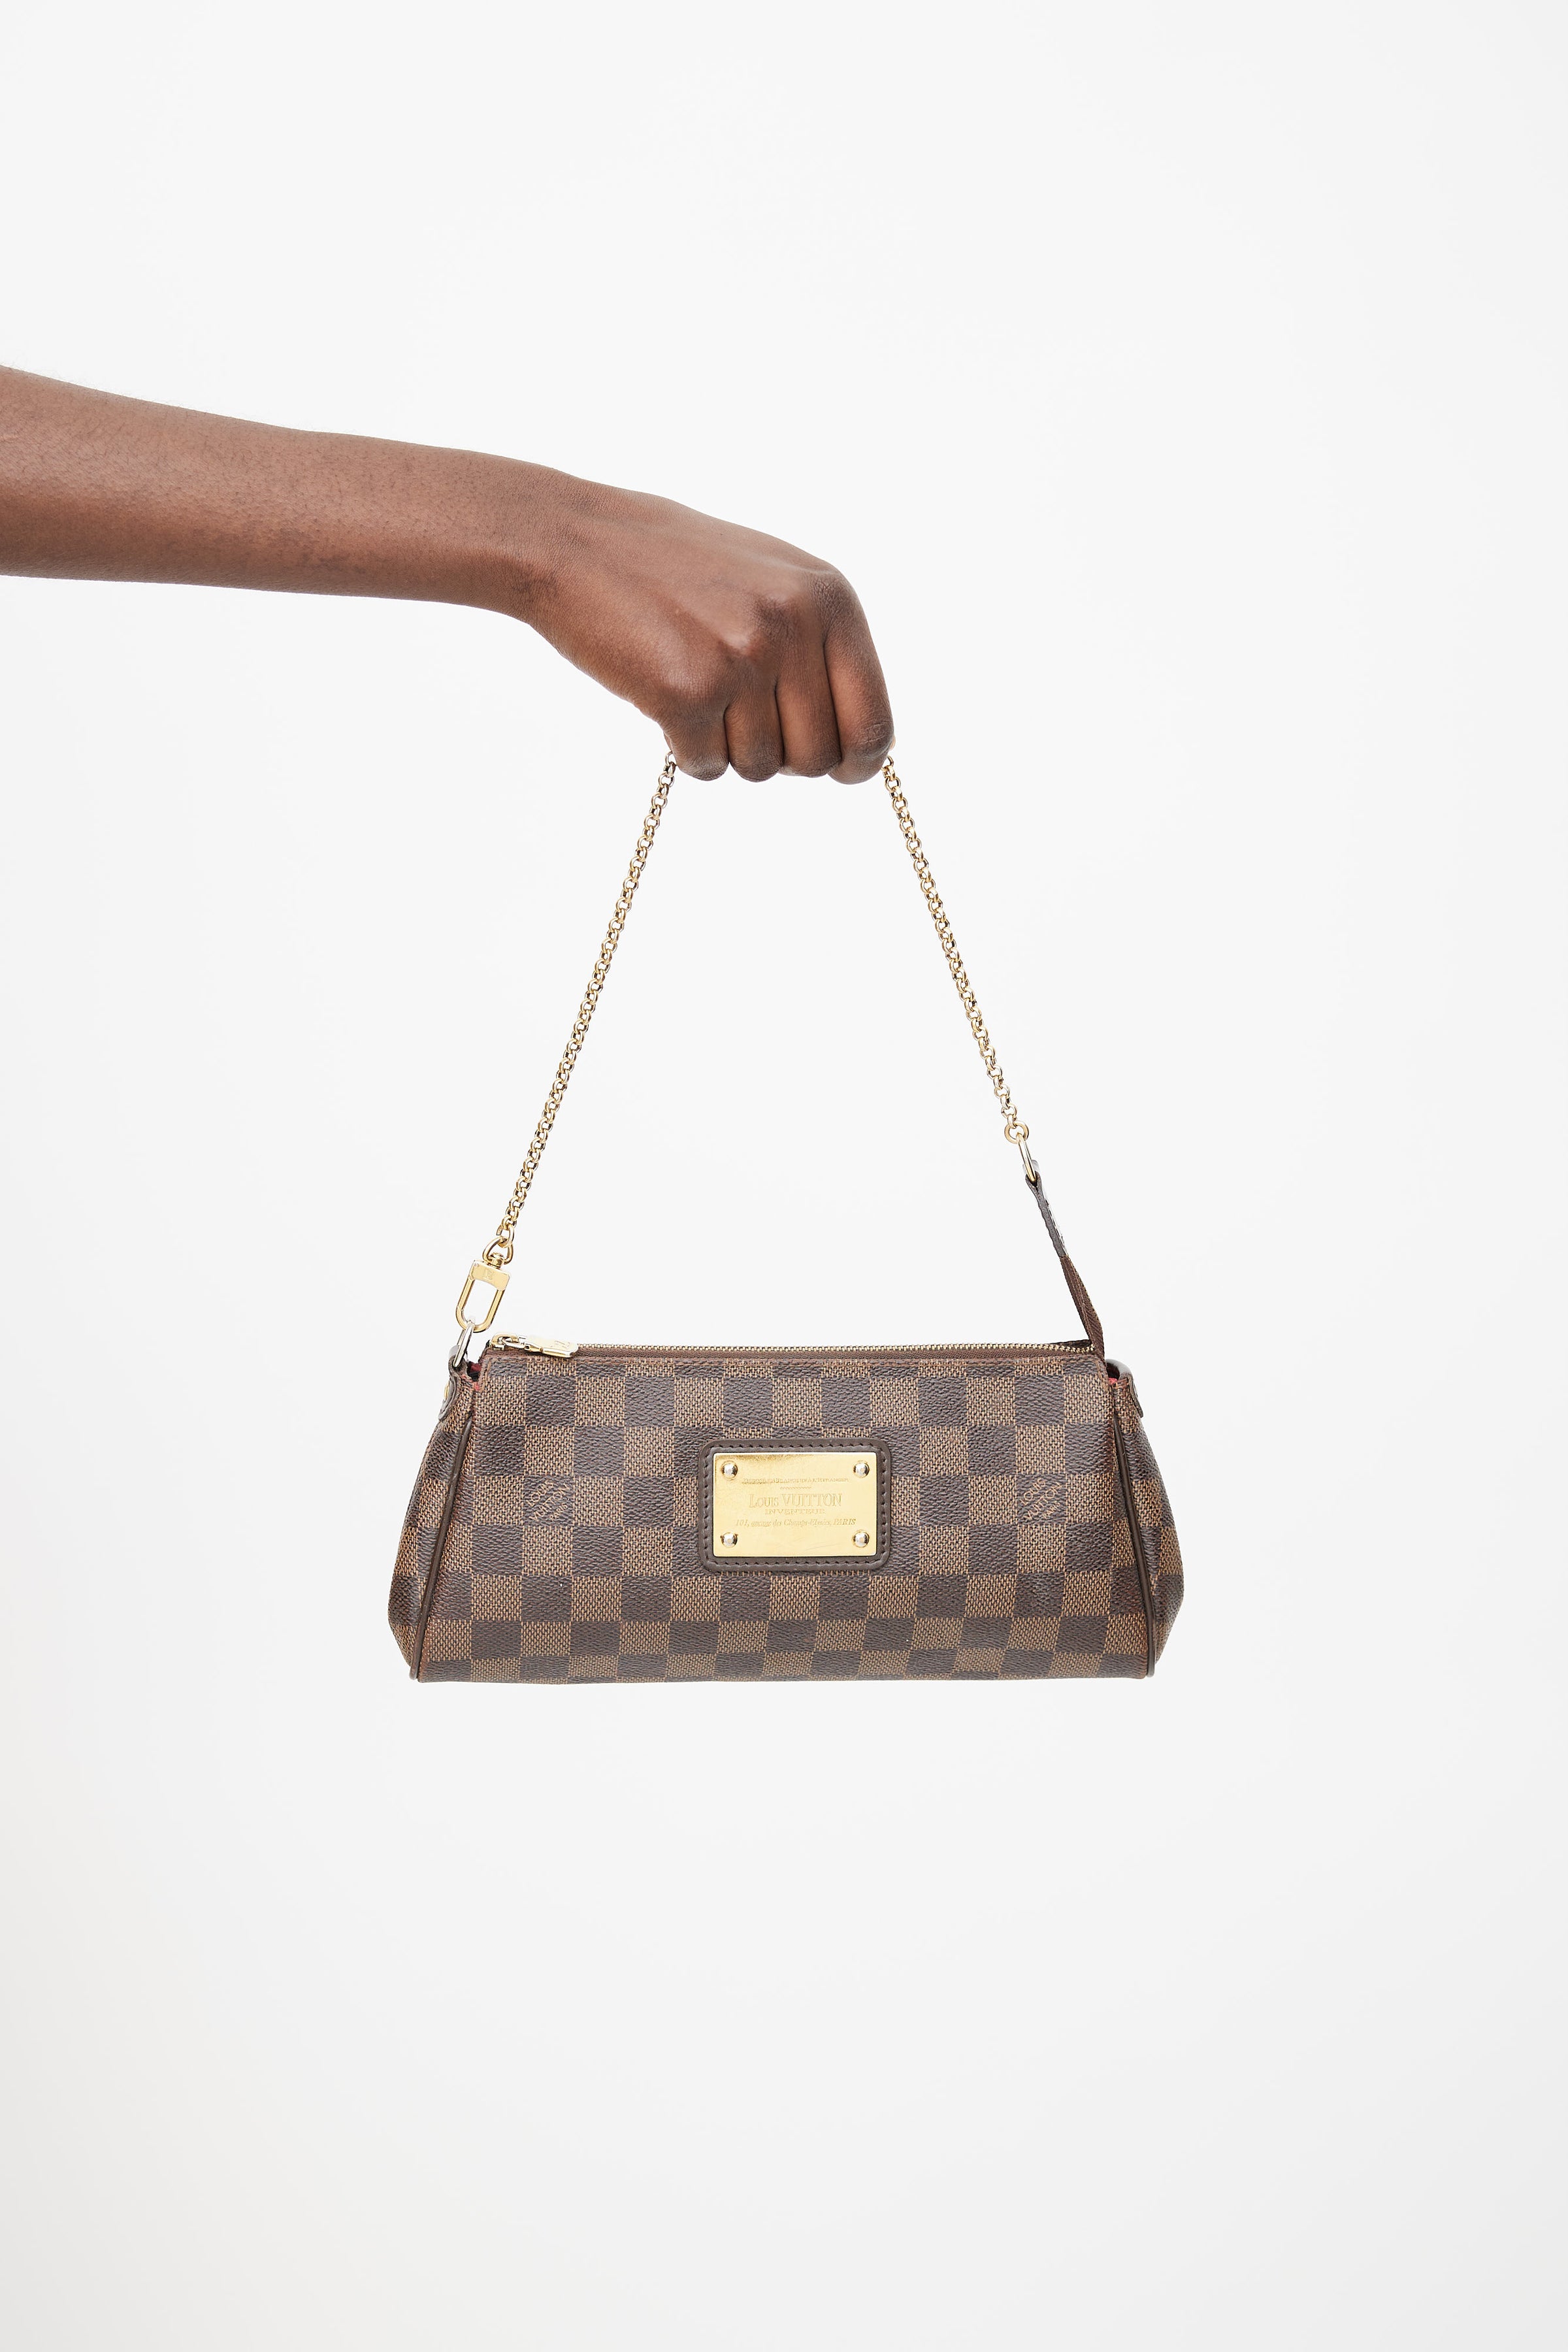 LOUIS VUITTON S/S 2012 Ace Brown Damier Canvas and Leather Low